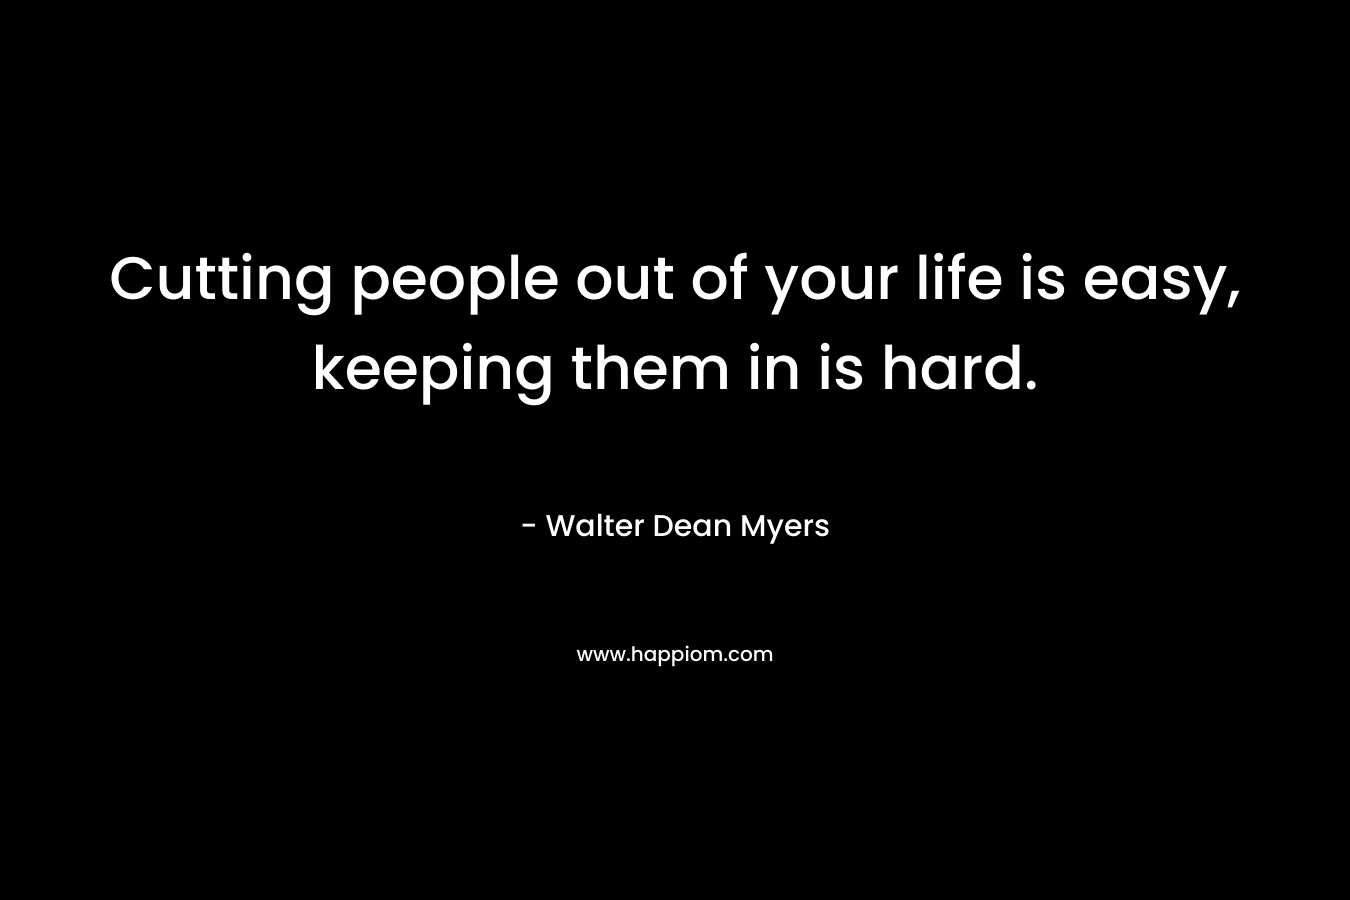 Cutting people out of your life is easy, keeping them in is hard.